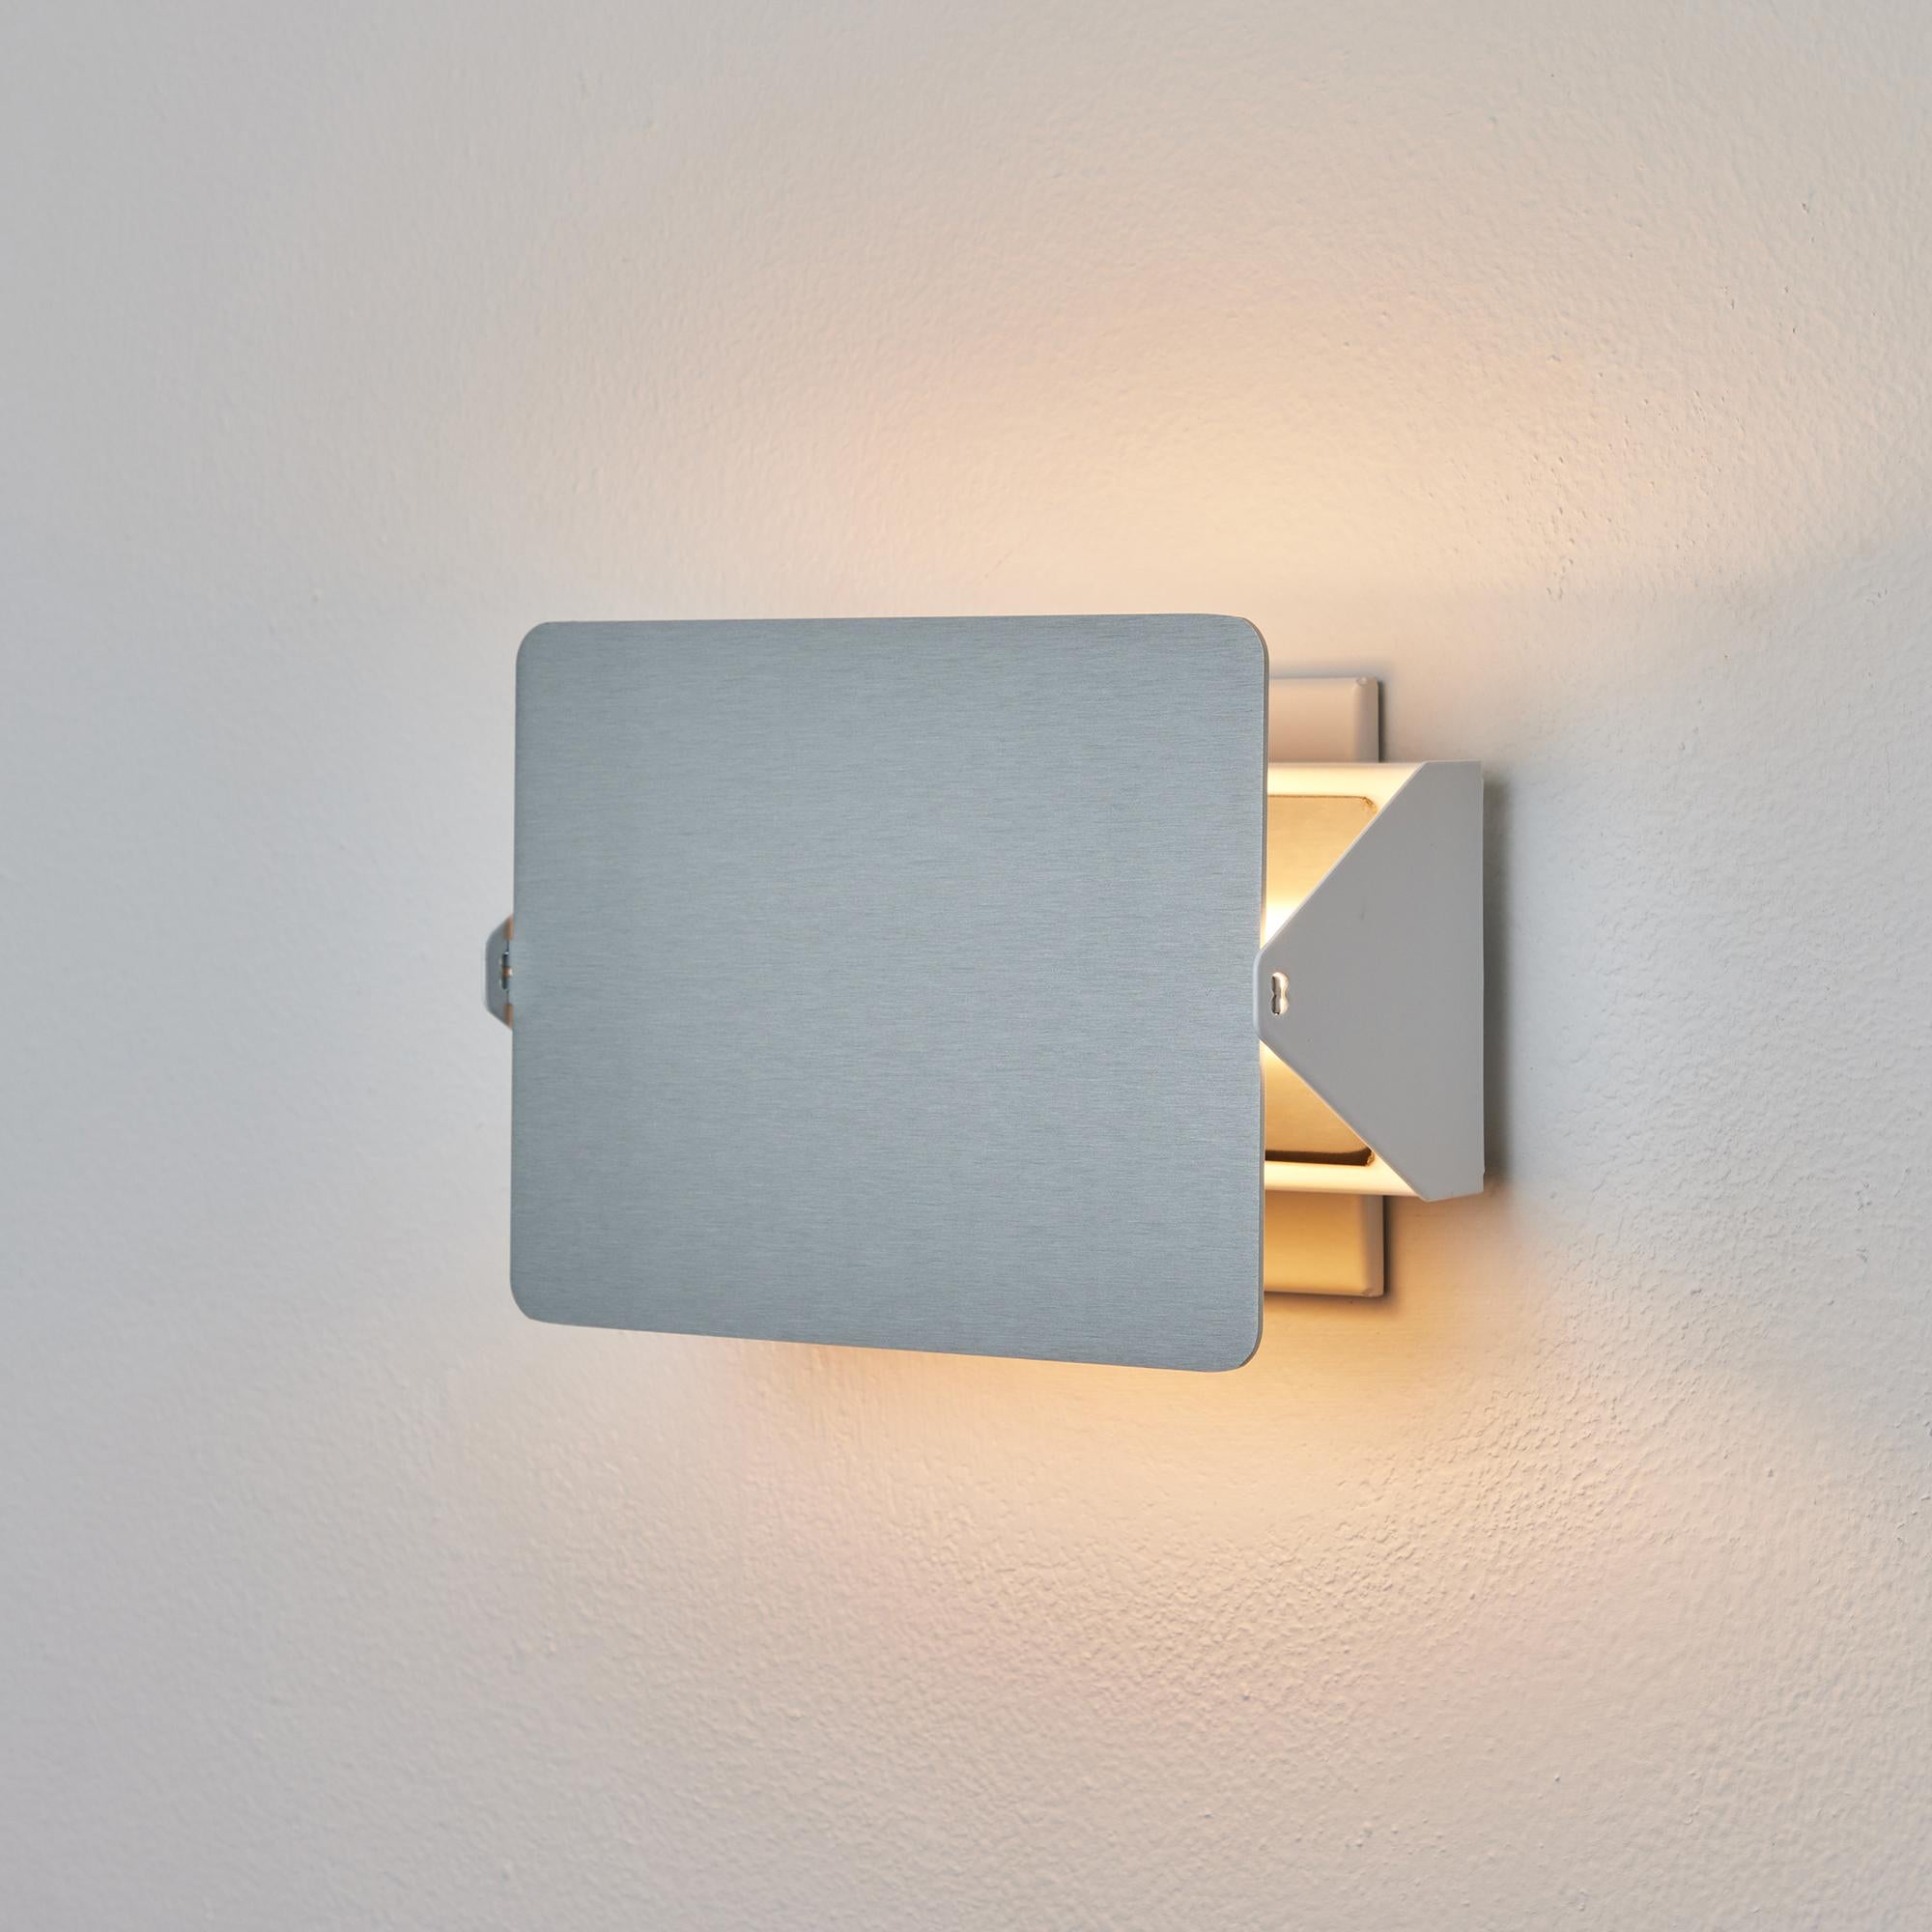 French Charlotte Perriand 'Applique à Volet Pivotant' Wall Light in Natural Aluminum For Sale